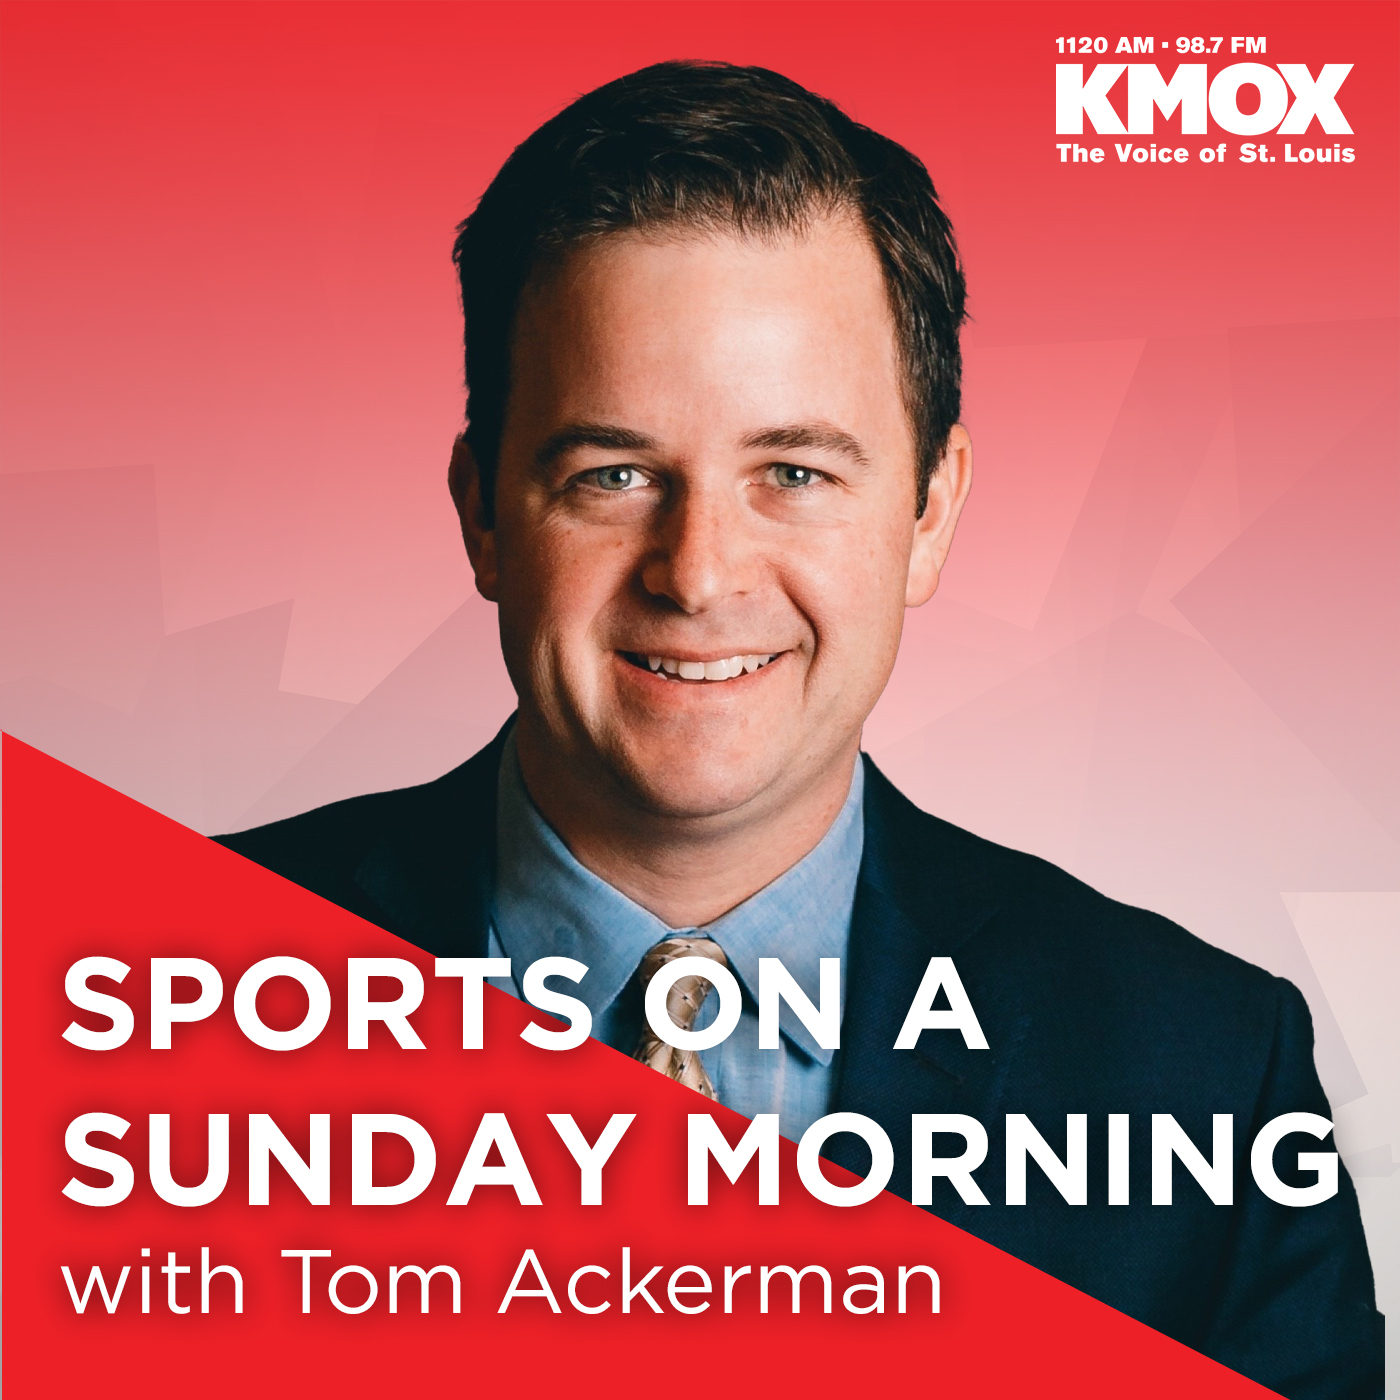 Hour 2 - Dual Racing Challenges, Cardinals' Performance, and Support for Edward Lowens